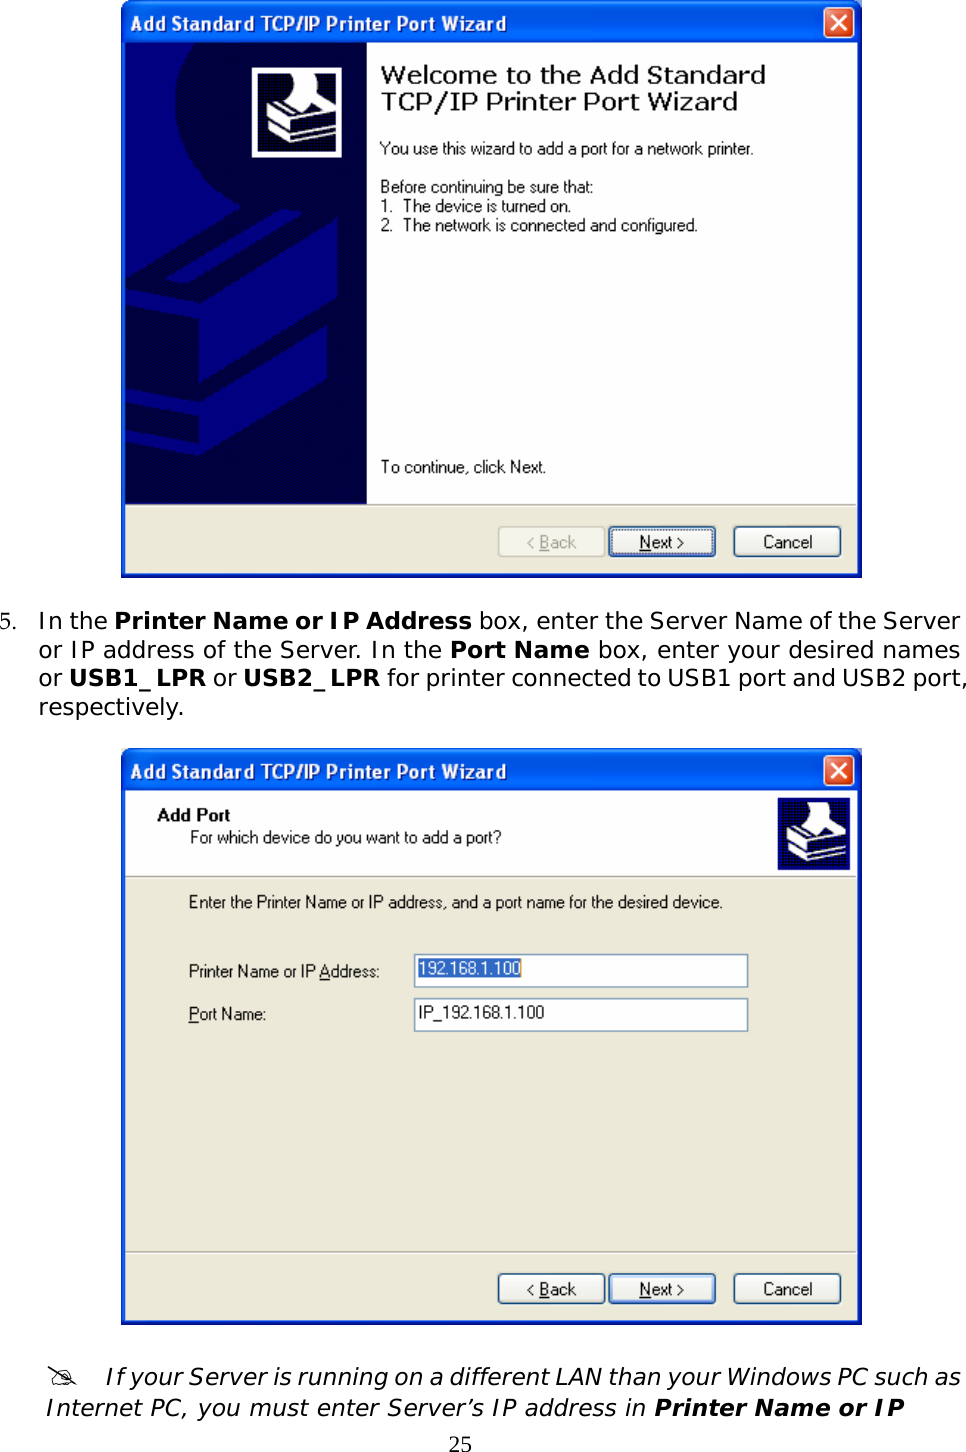     25  5. In the Printer Name or IP Address box, enter the Server Name of the Server or IP address of the Server. In the Port Name box, enter your desired names or USB1_LPR or USB2_LPR for printer connected to USB1 port and USB2 port, respectively.     #  If your Server is running on a different LAN than your Windows PC such as Internet PC, you must enter Server’s IP address in Printer Name or IP 